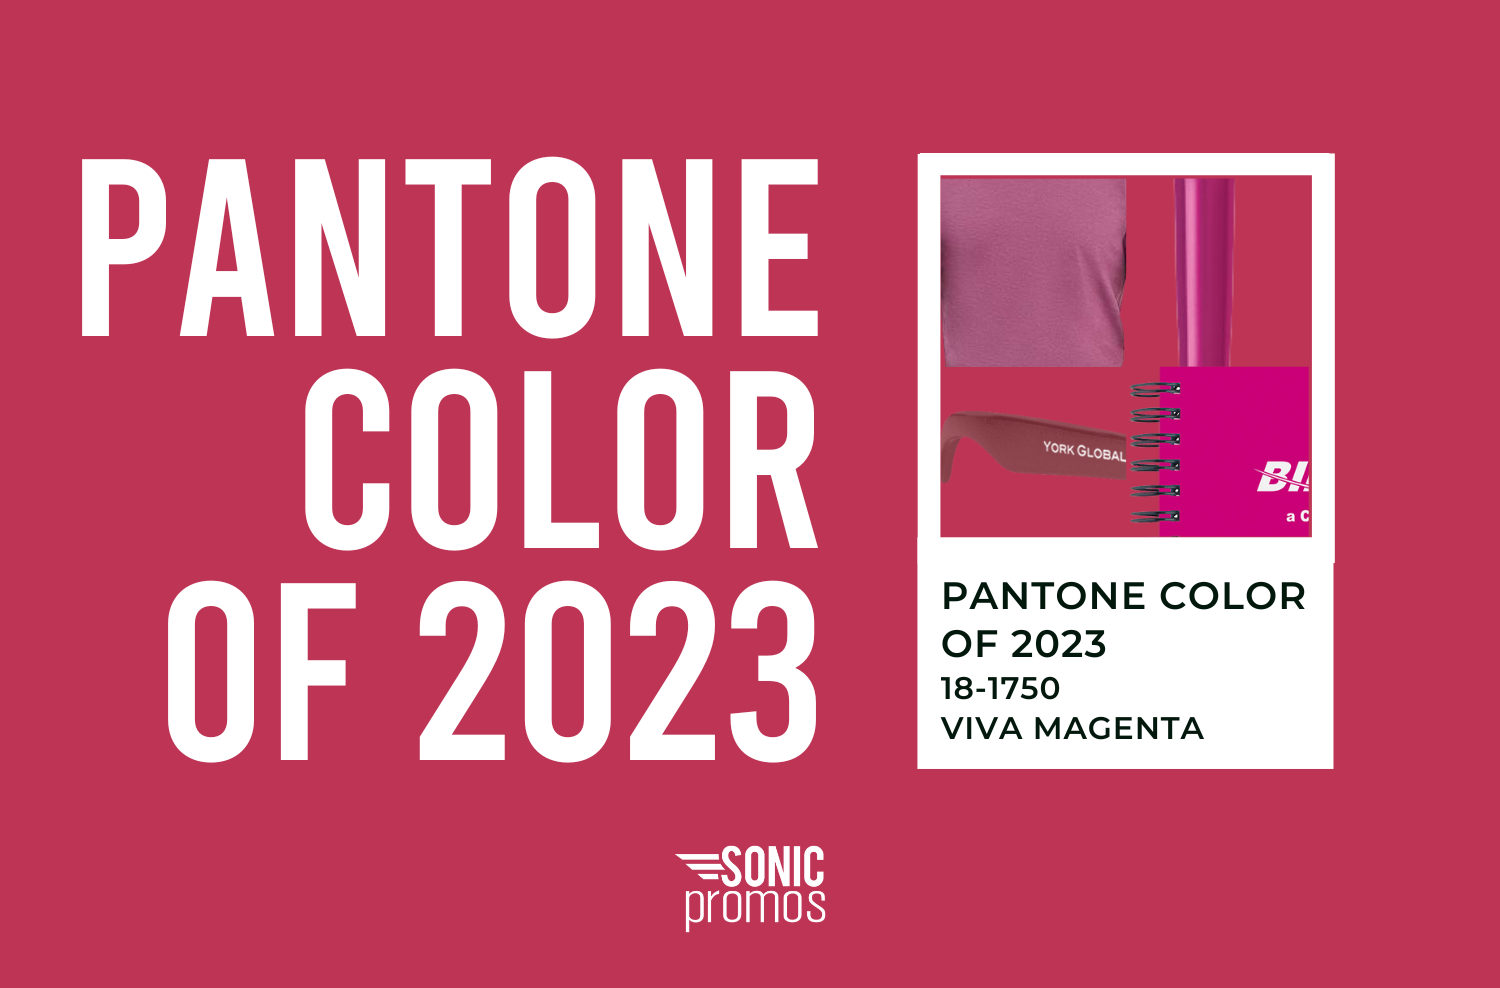 Viva Magenta! All About Pantone’s 2023 Color of the Year